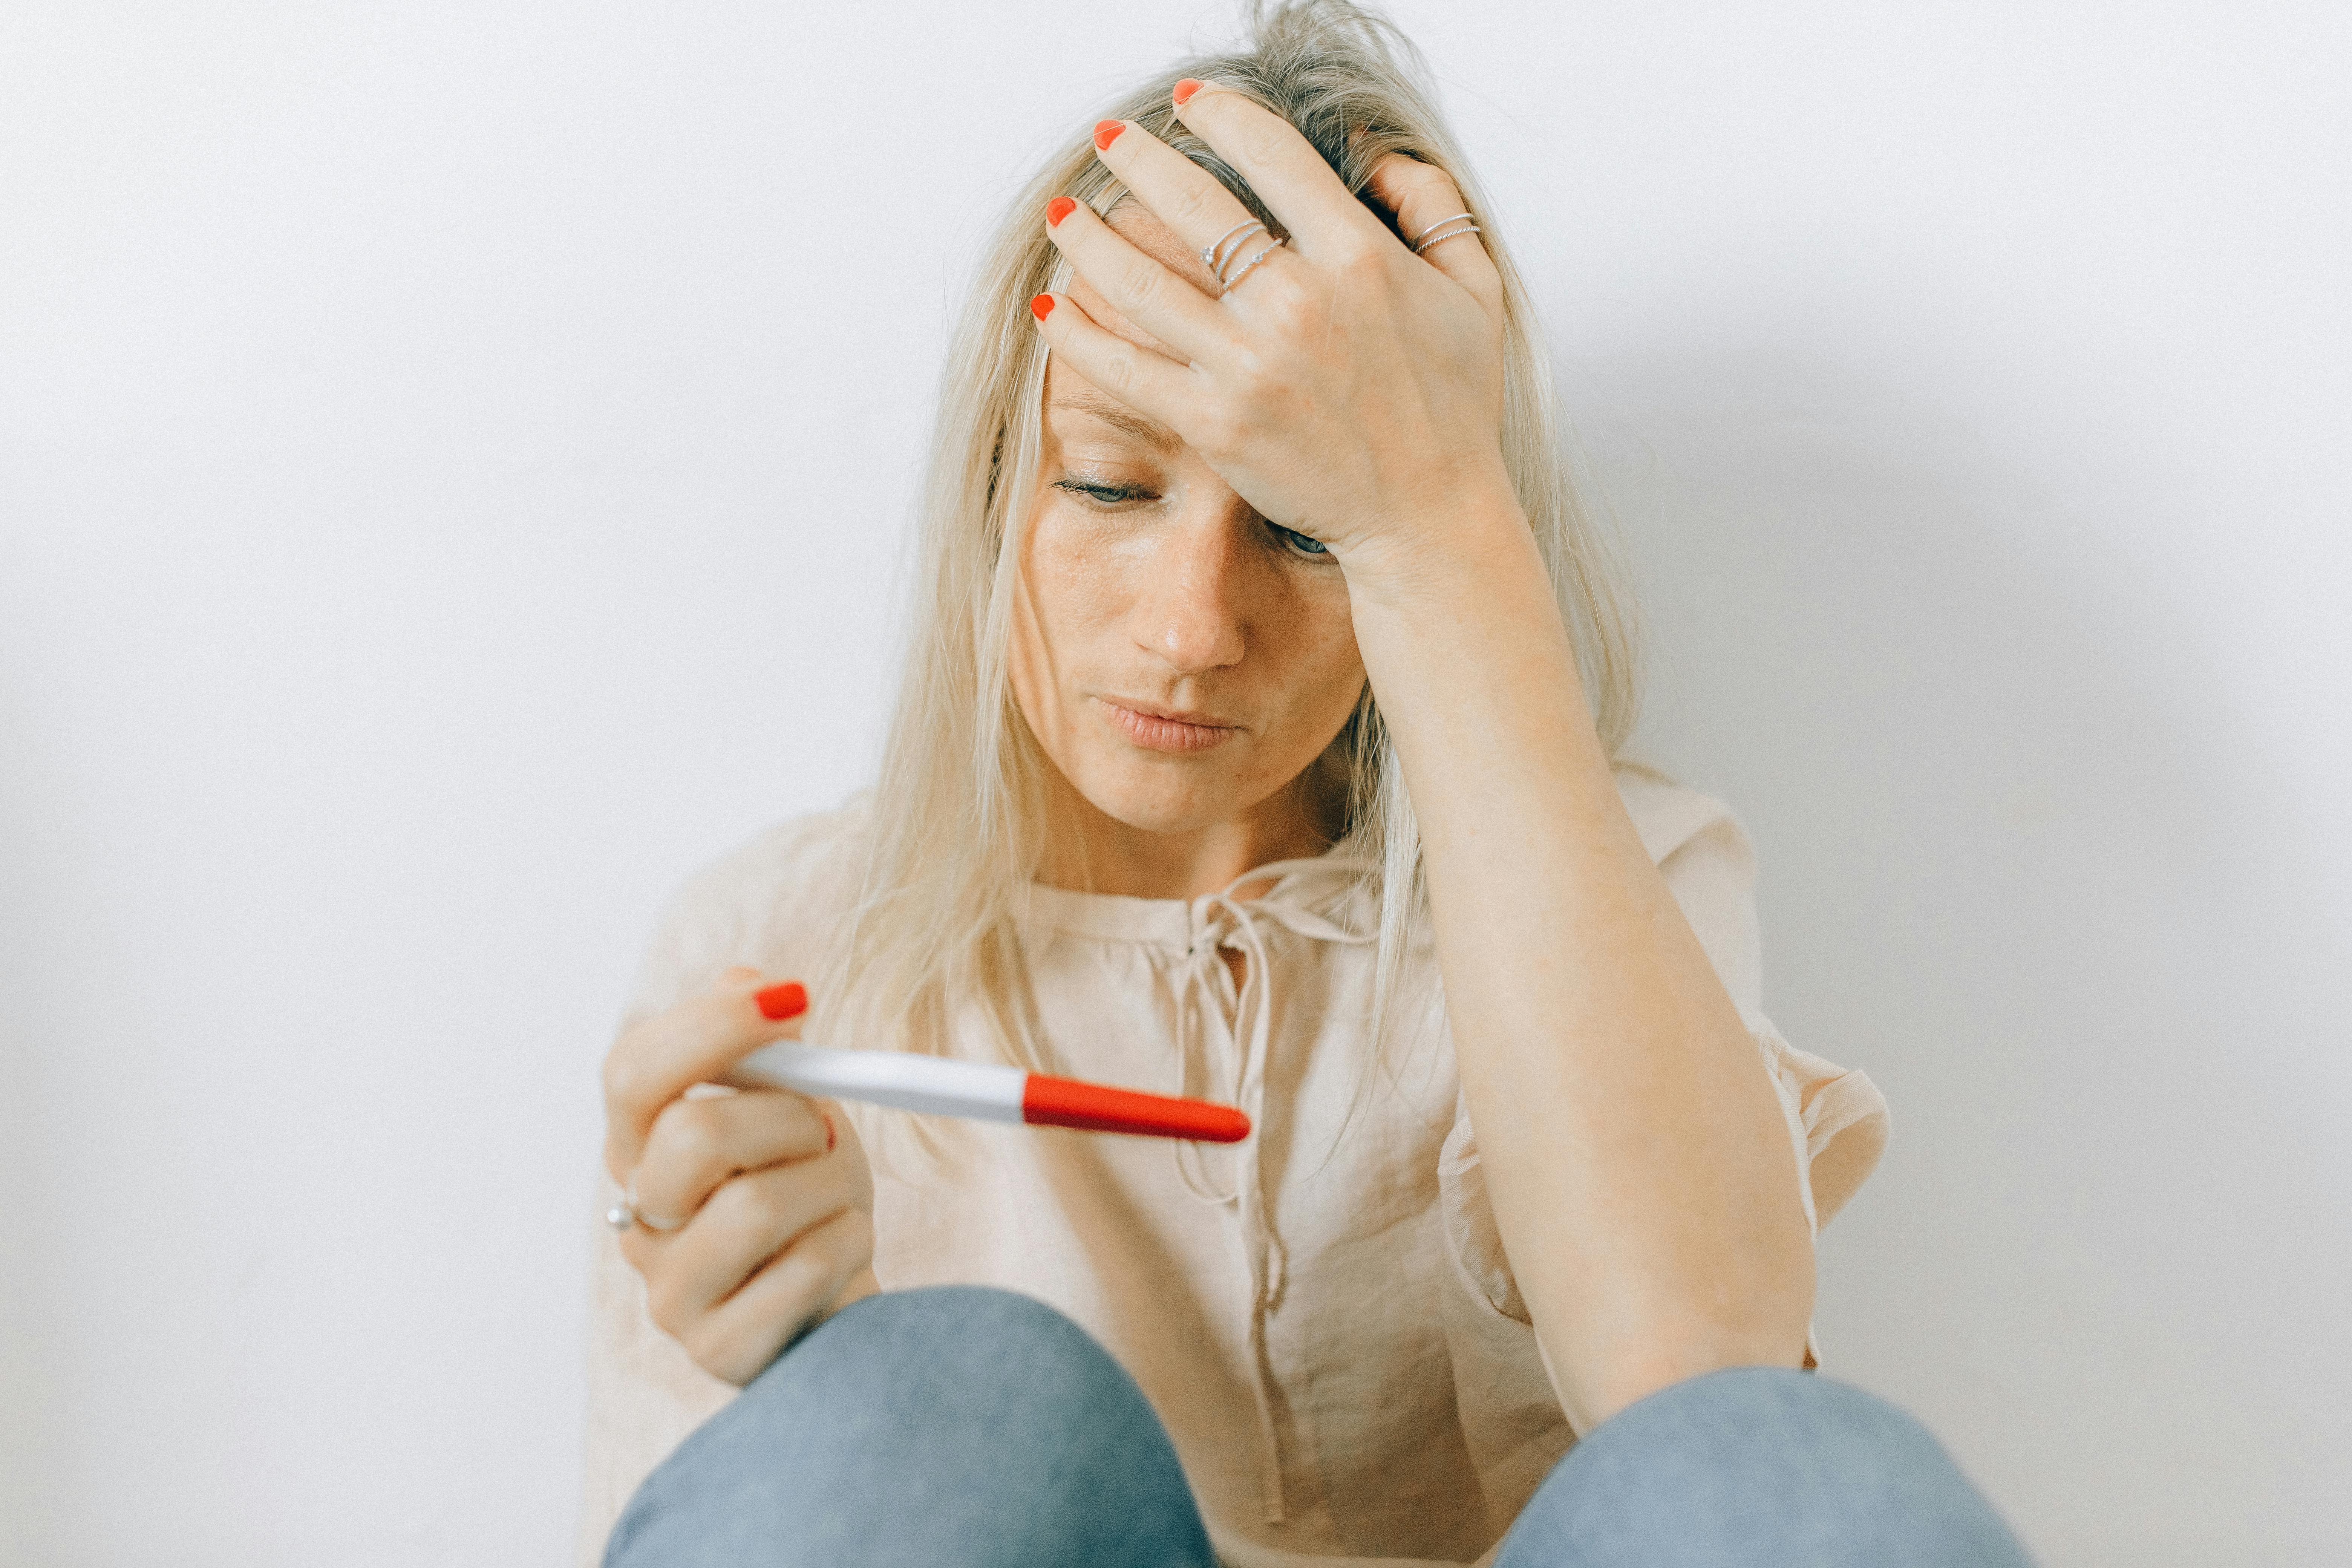 Awoman with a pregnancy test | Source: Pexels